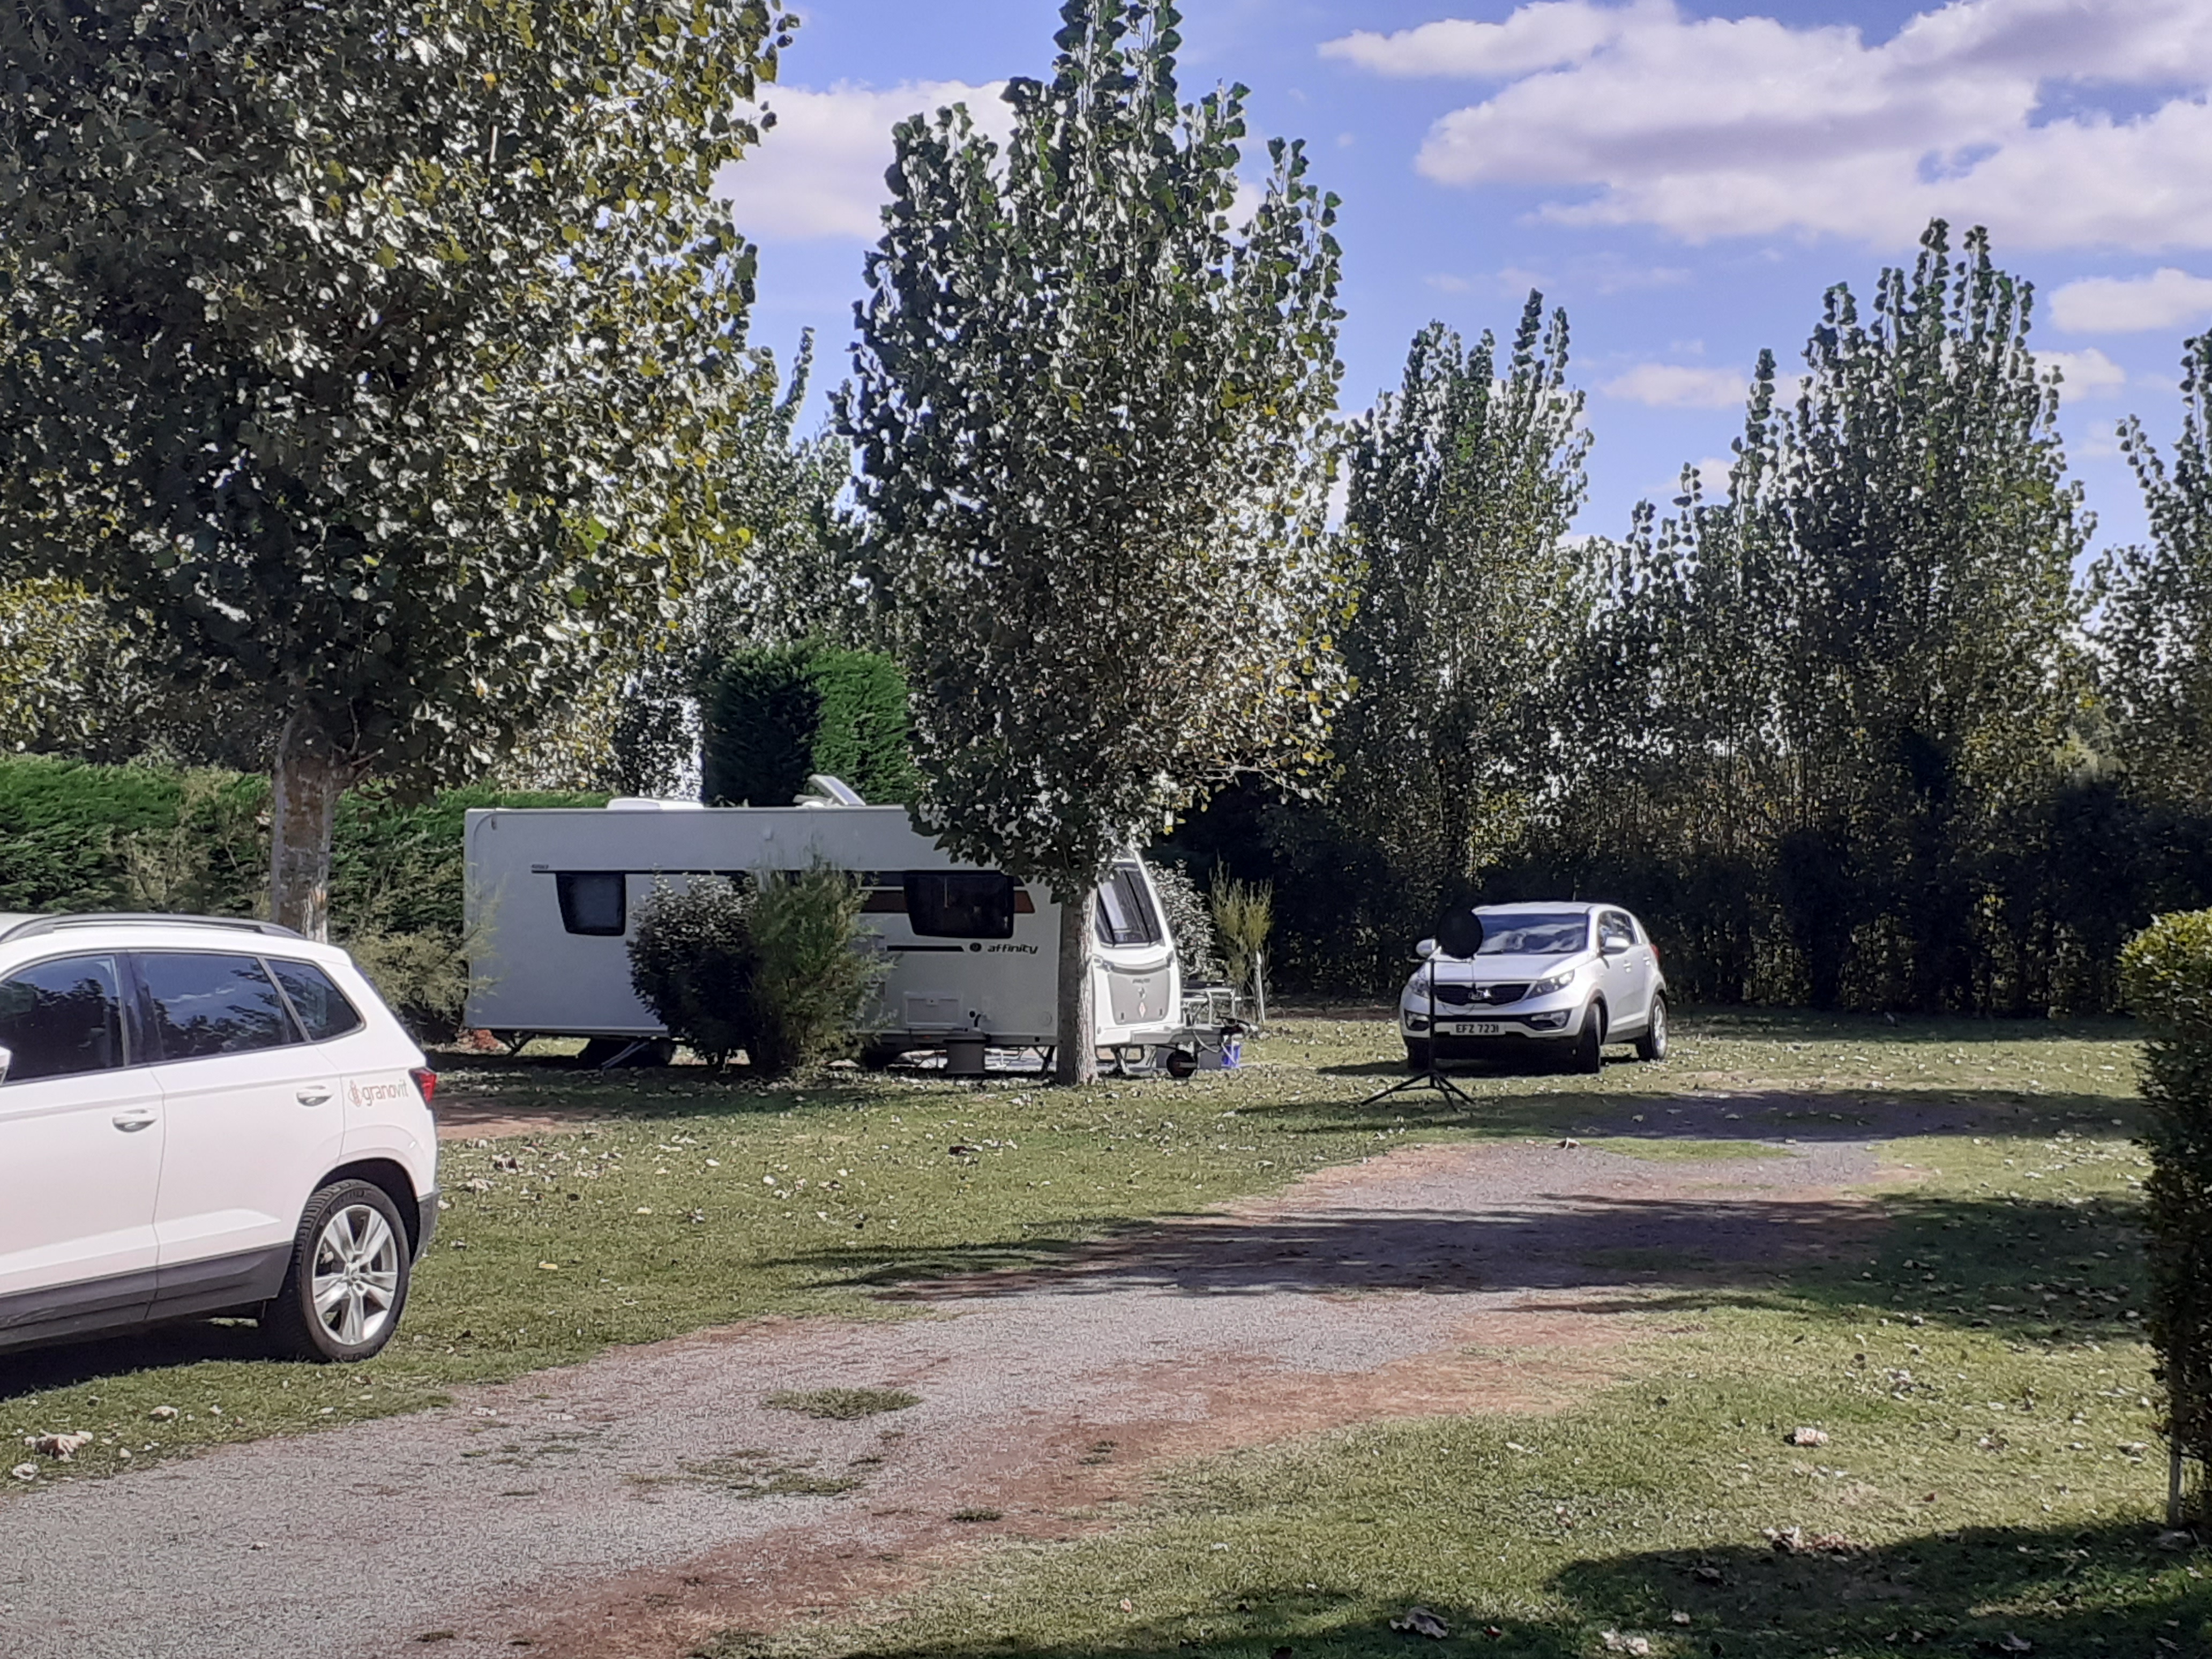 Pitch caravan  + 7.50 m  (water, electricity, drain, 2 people and 1 vehicle) 1/2 Ppl. 1/2 Ppl.